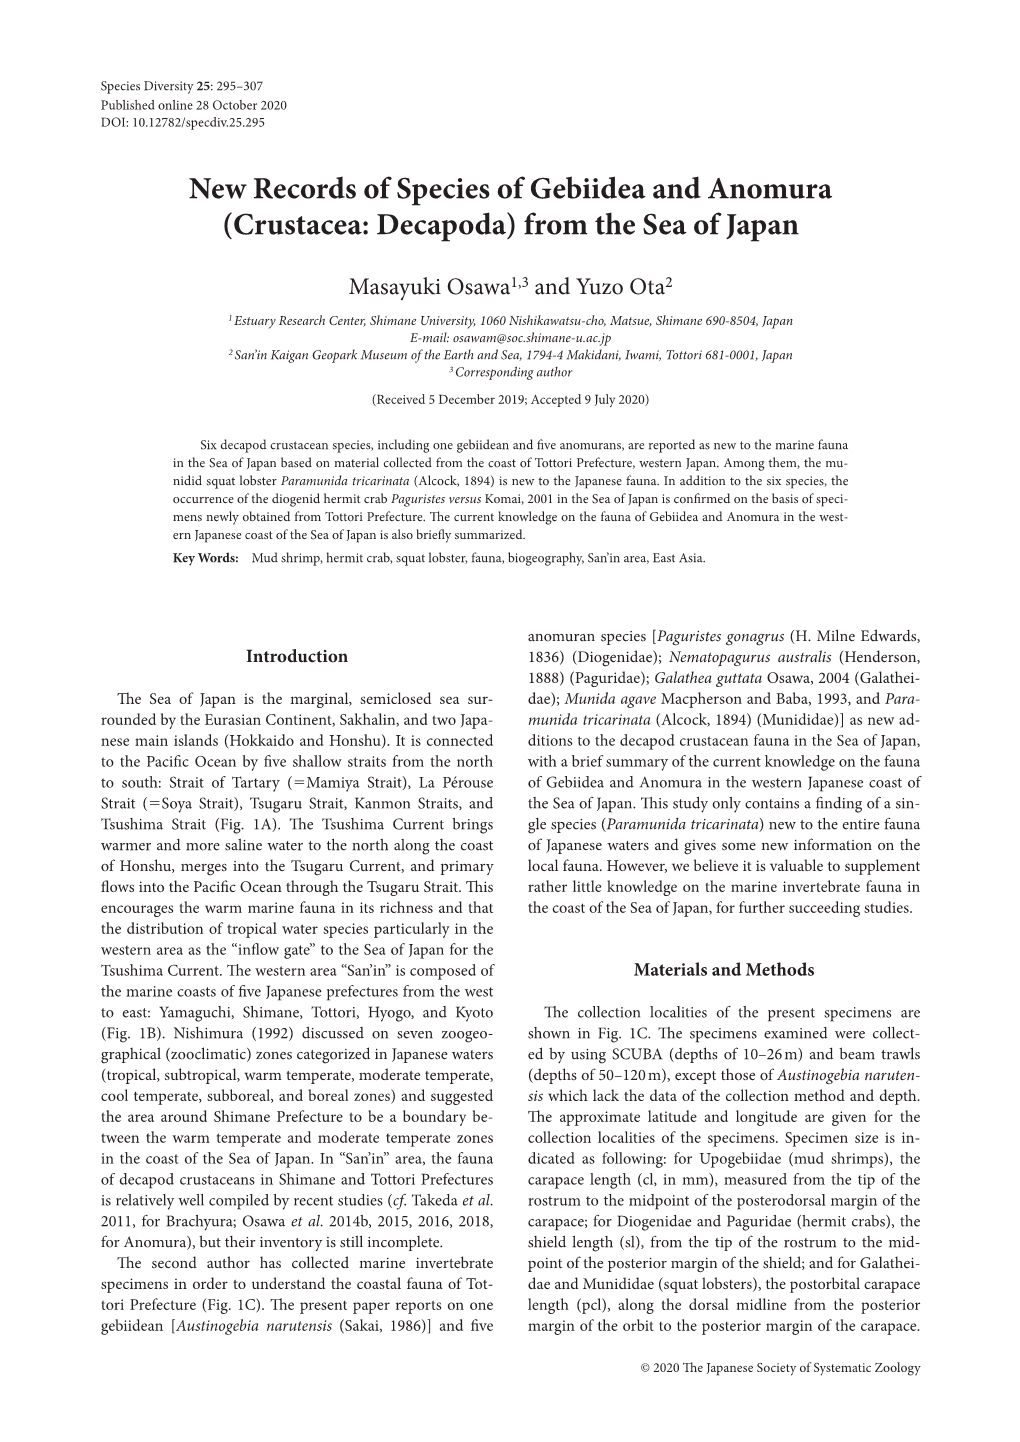 New Records of Species of Gebiidea and Anomura (Crustacea: Decapoda) from the Sea of Japan